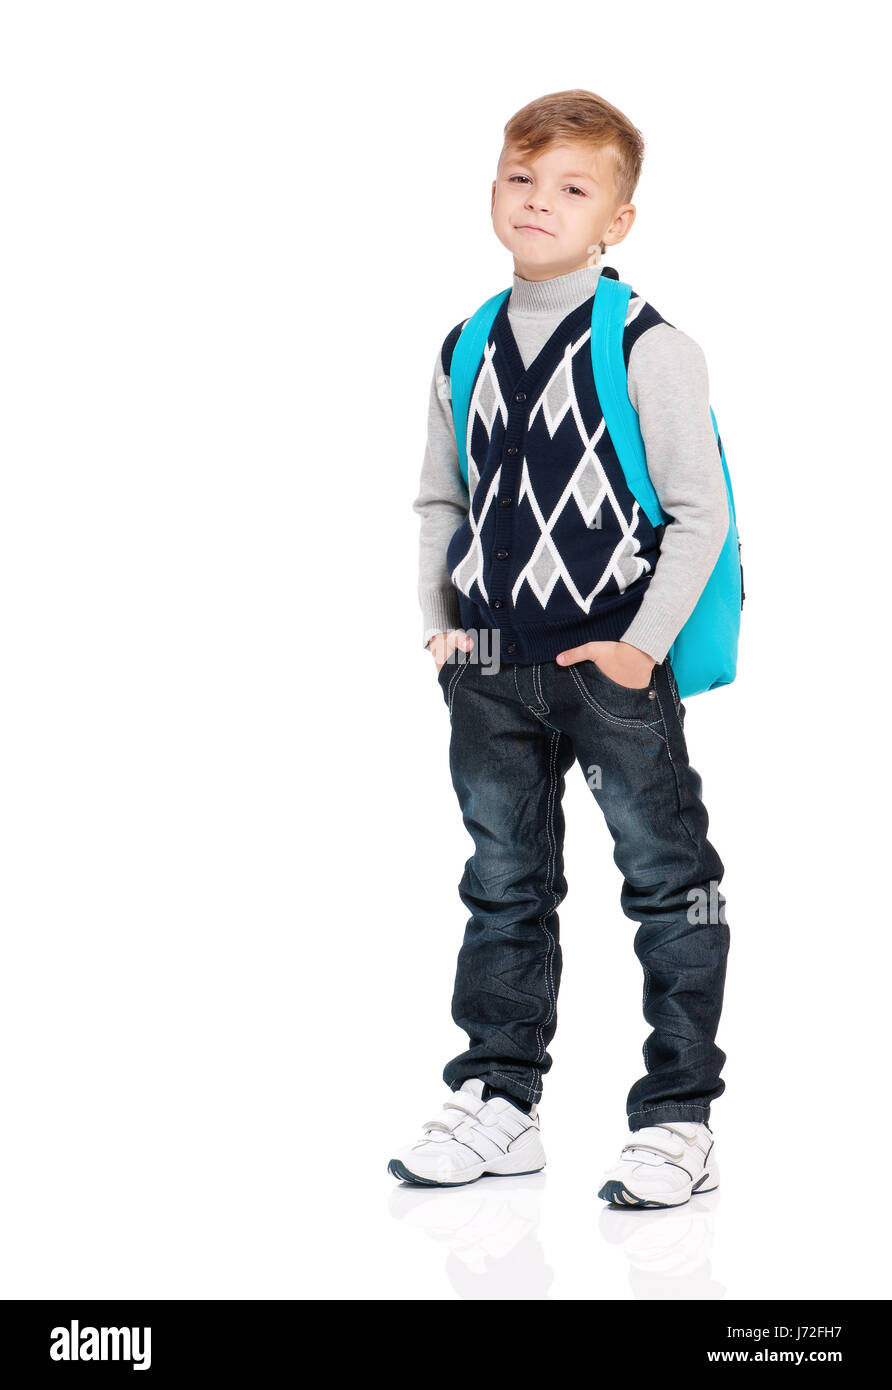 School boy with backpack Stock Photo